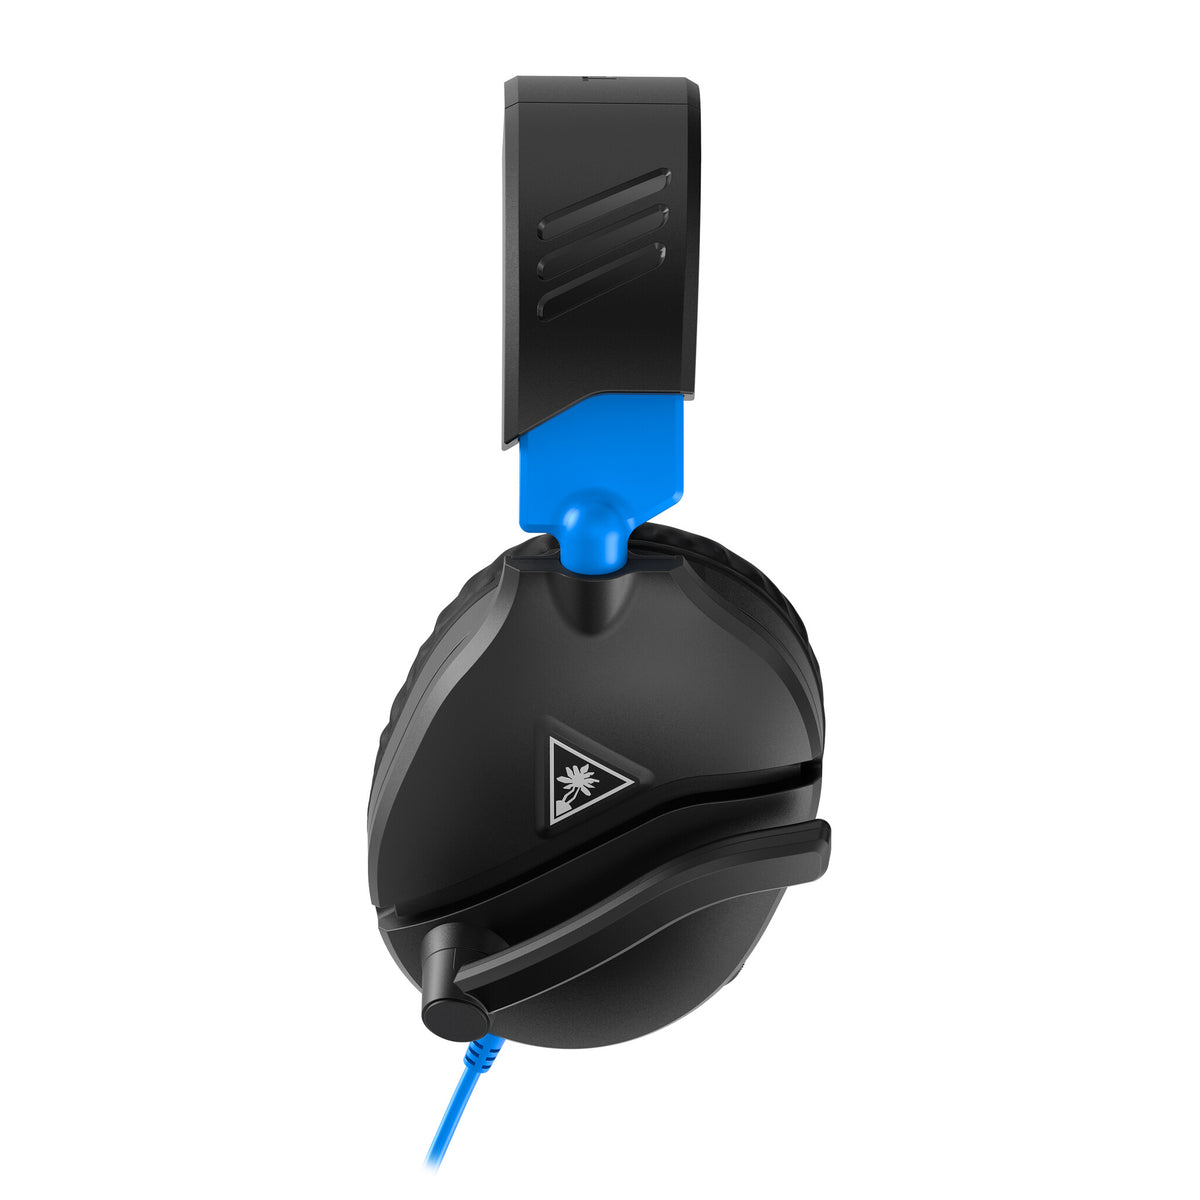 Turtle Beach Recon 70 - Wired Gaming Headset for PS4 / PS5 in Black / Blue